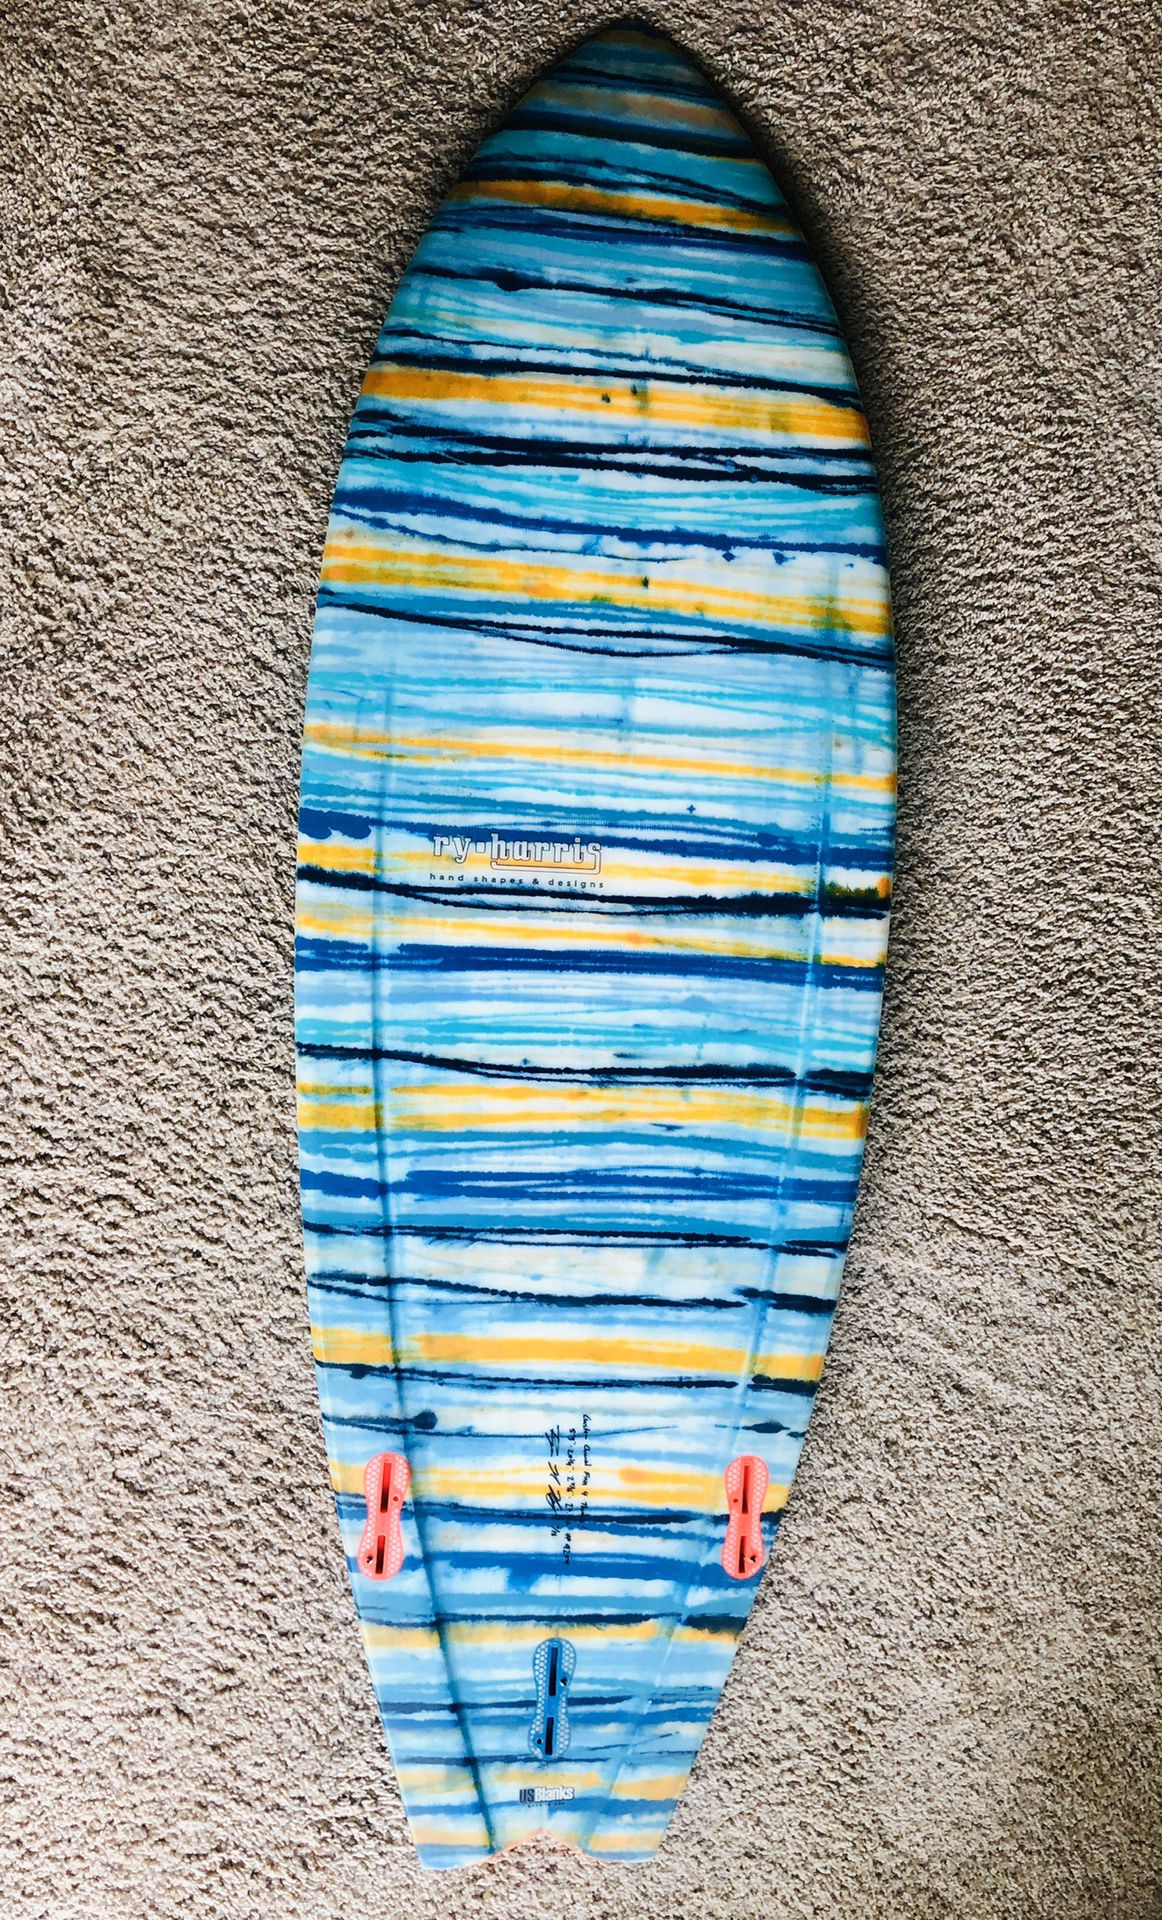 5'3 go fish inspired surfboard- 28L